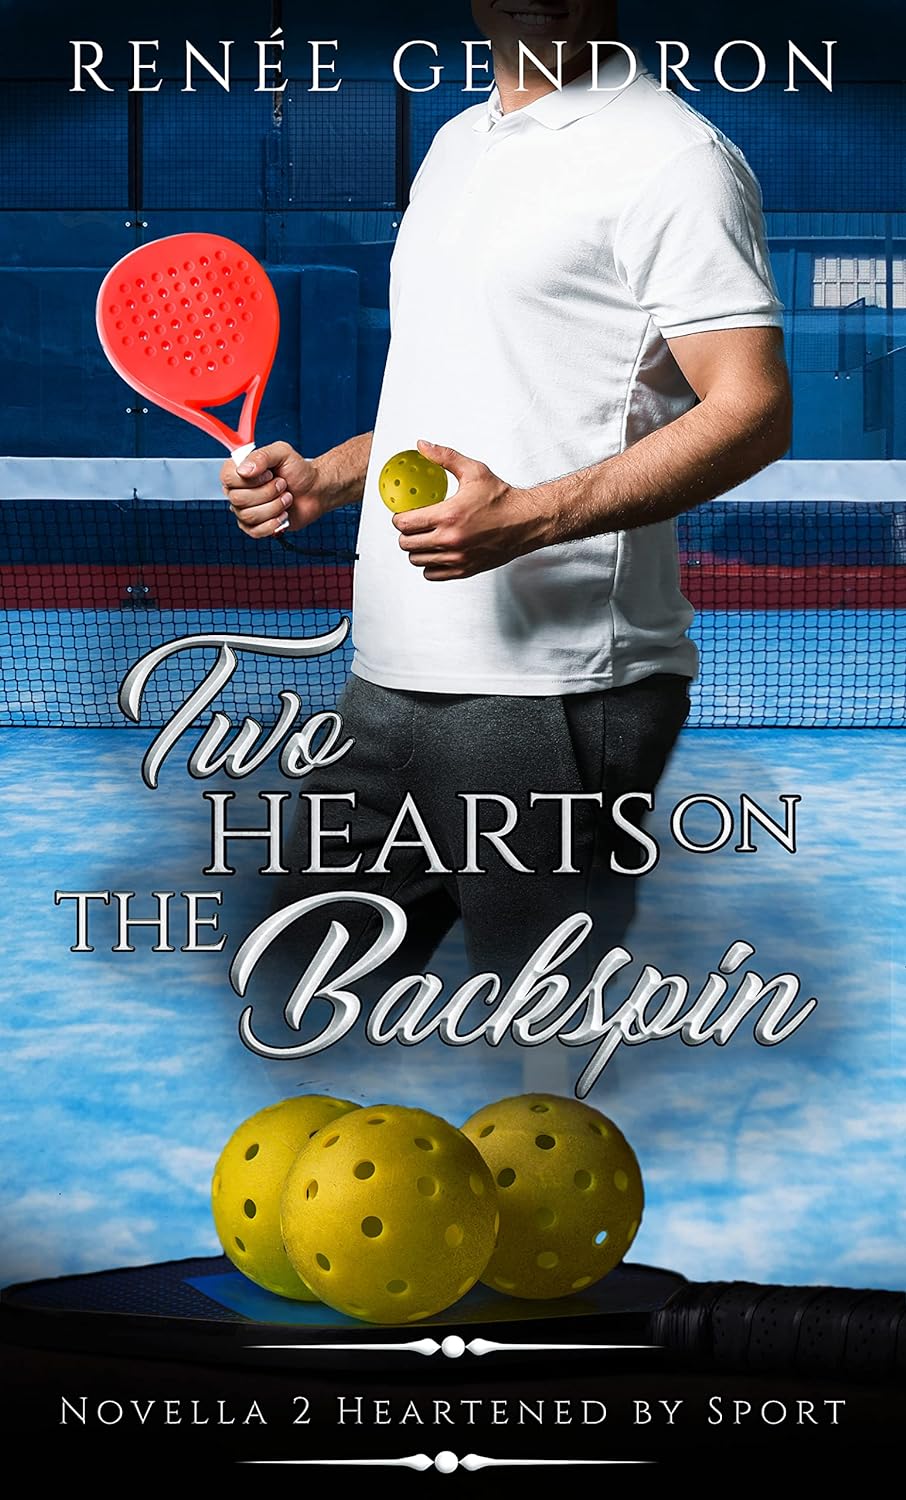 Two Hearts on the Backspin by Renée Gendron; 1/31/2023